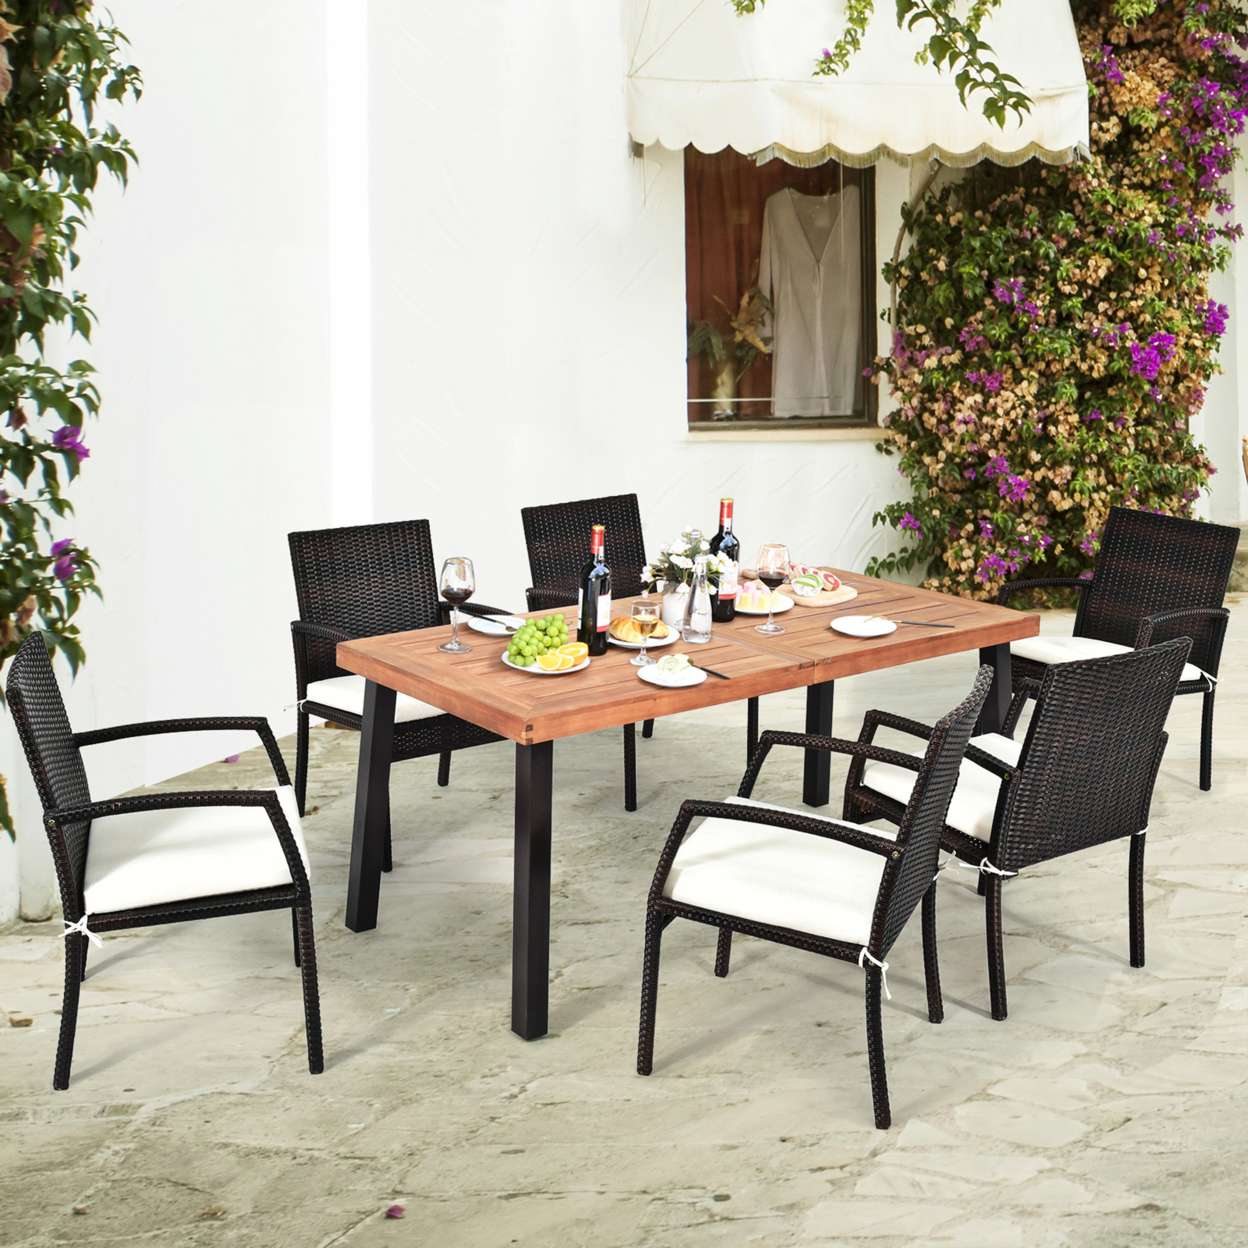 7PCS Patio Rattan Dining Set Wooden Table Top Cushioned Chair Garden